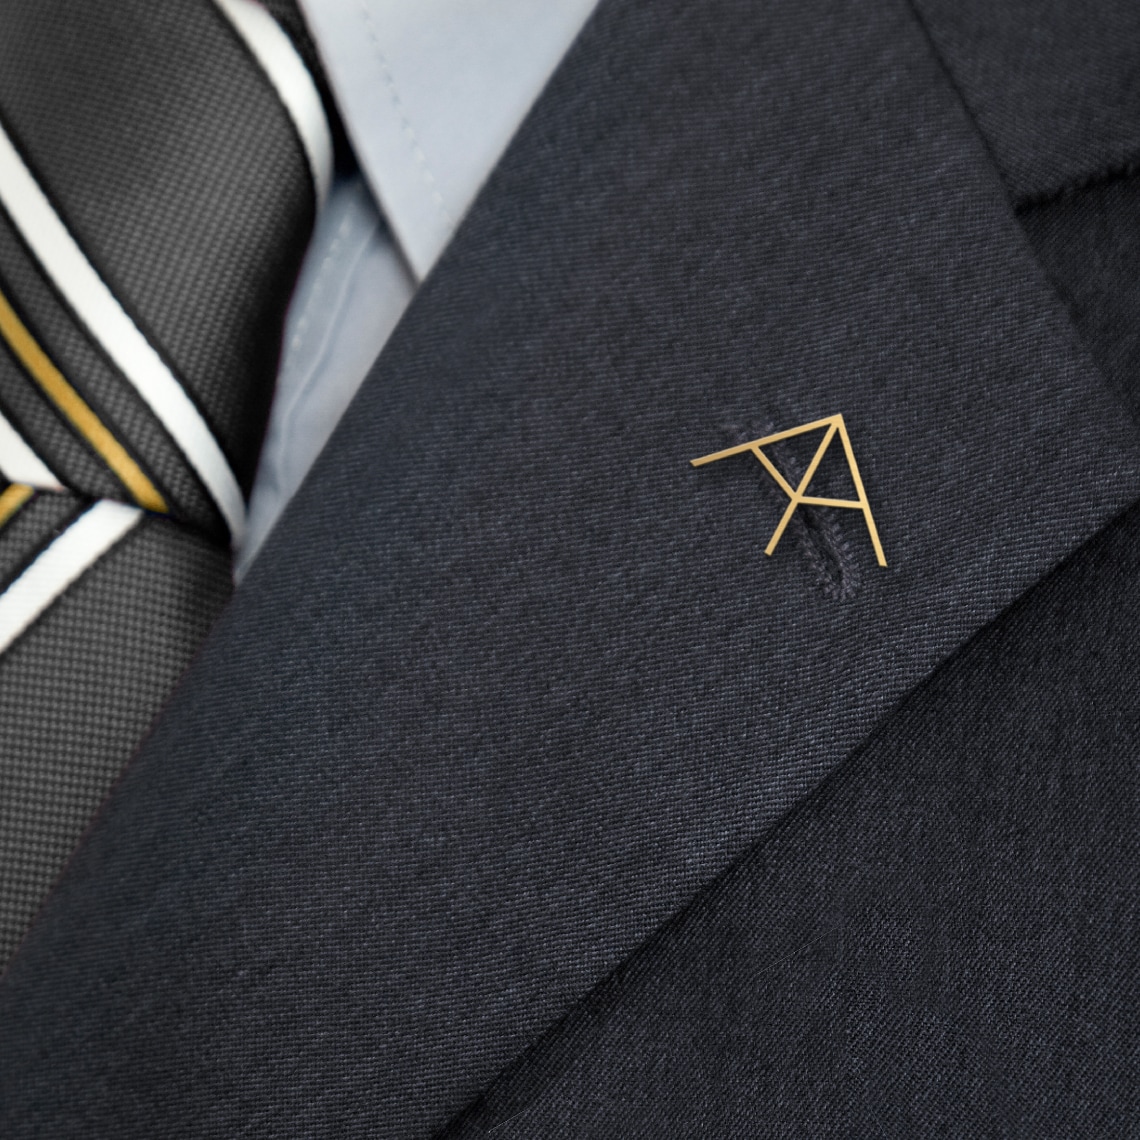 Atalaya symbol applied as a pin on a suit lapel